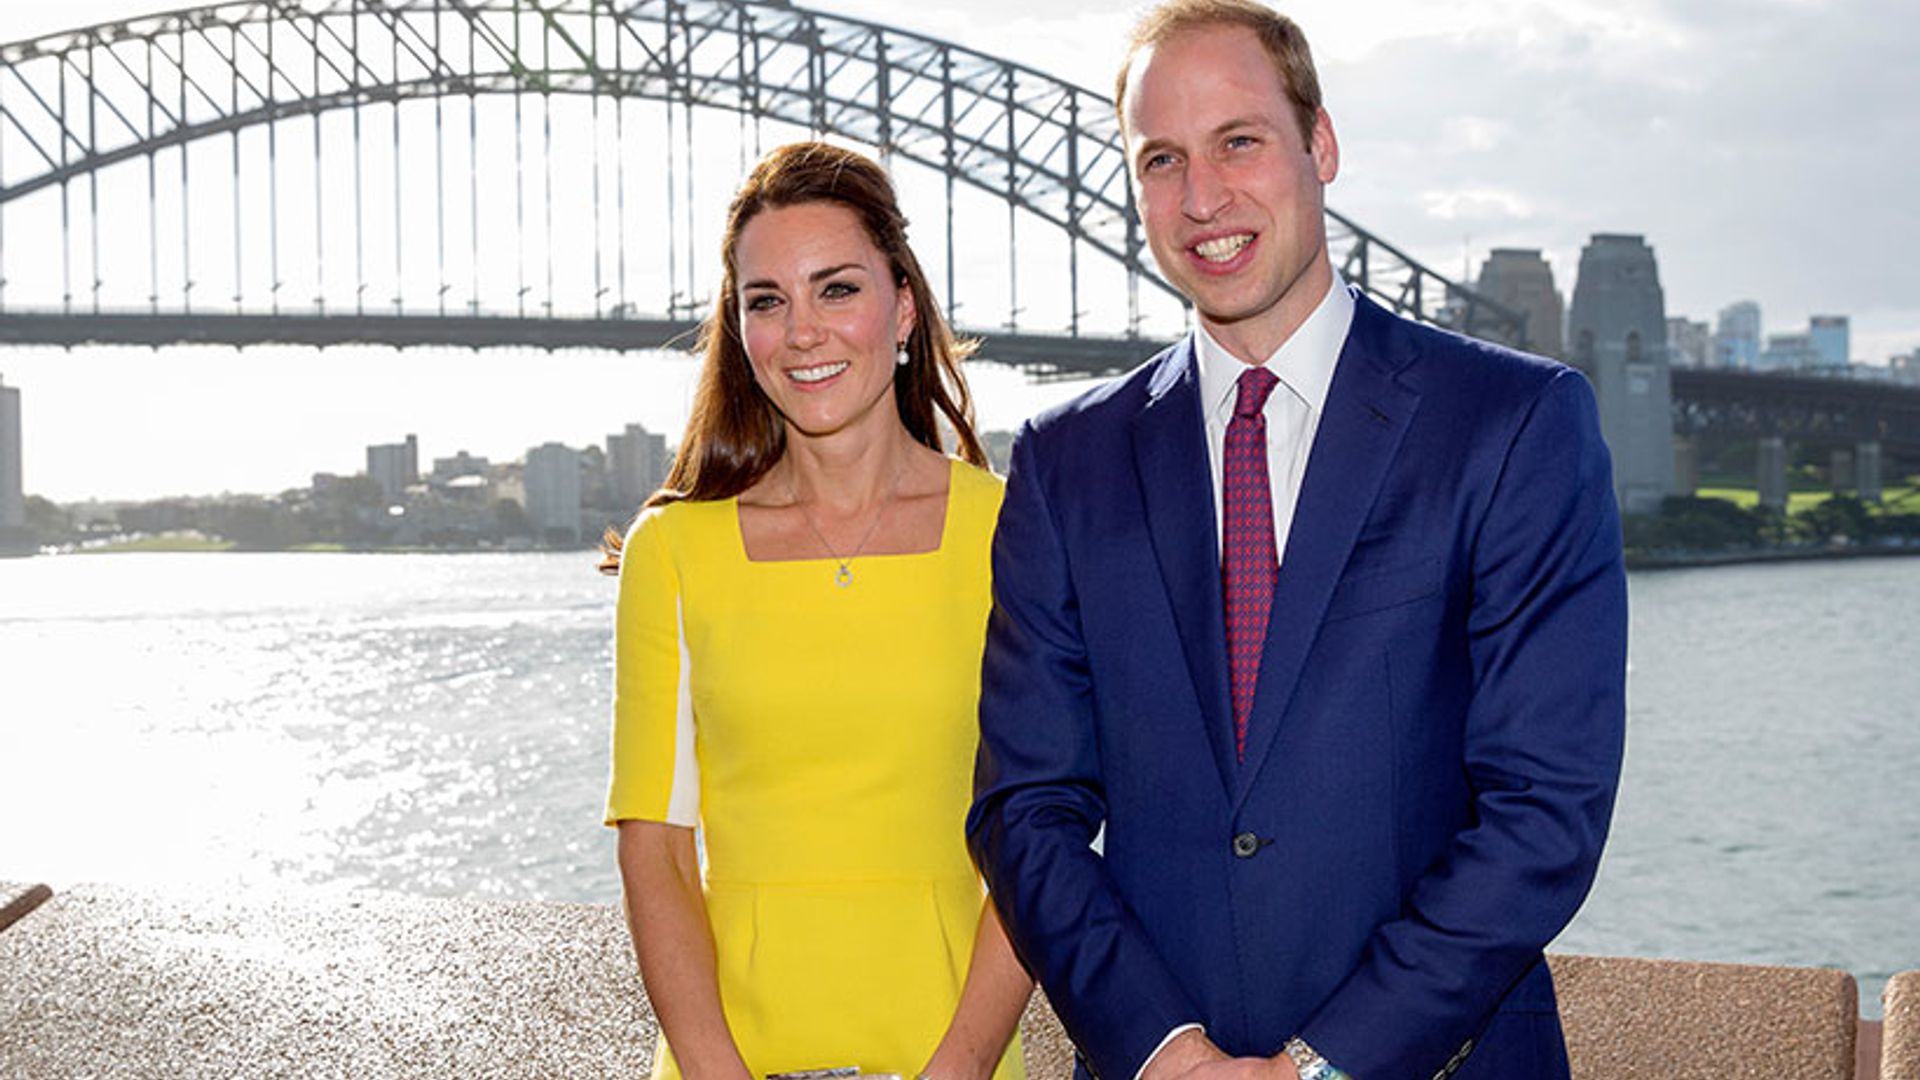 Prince Harry and Meghan Markle recreate Prince William and Kate Middleton's Sydney Harbour Bridge pose